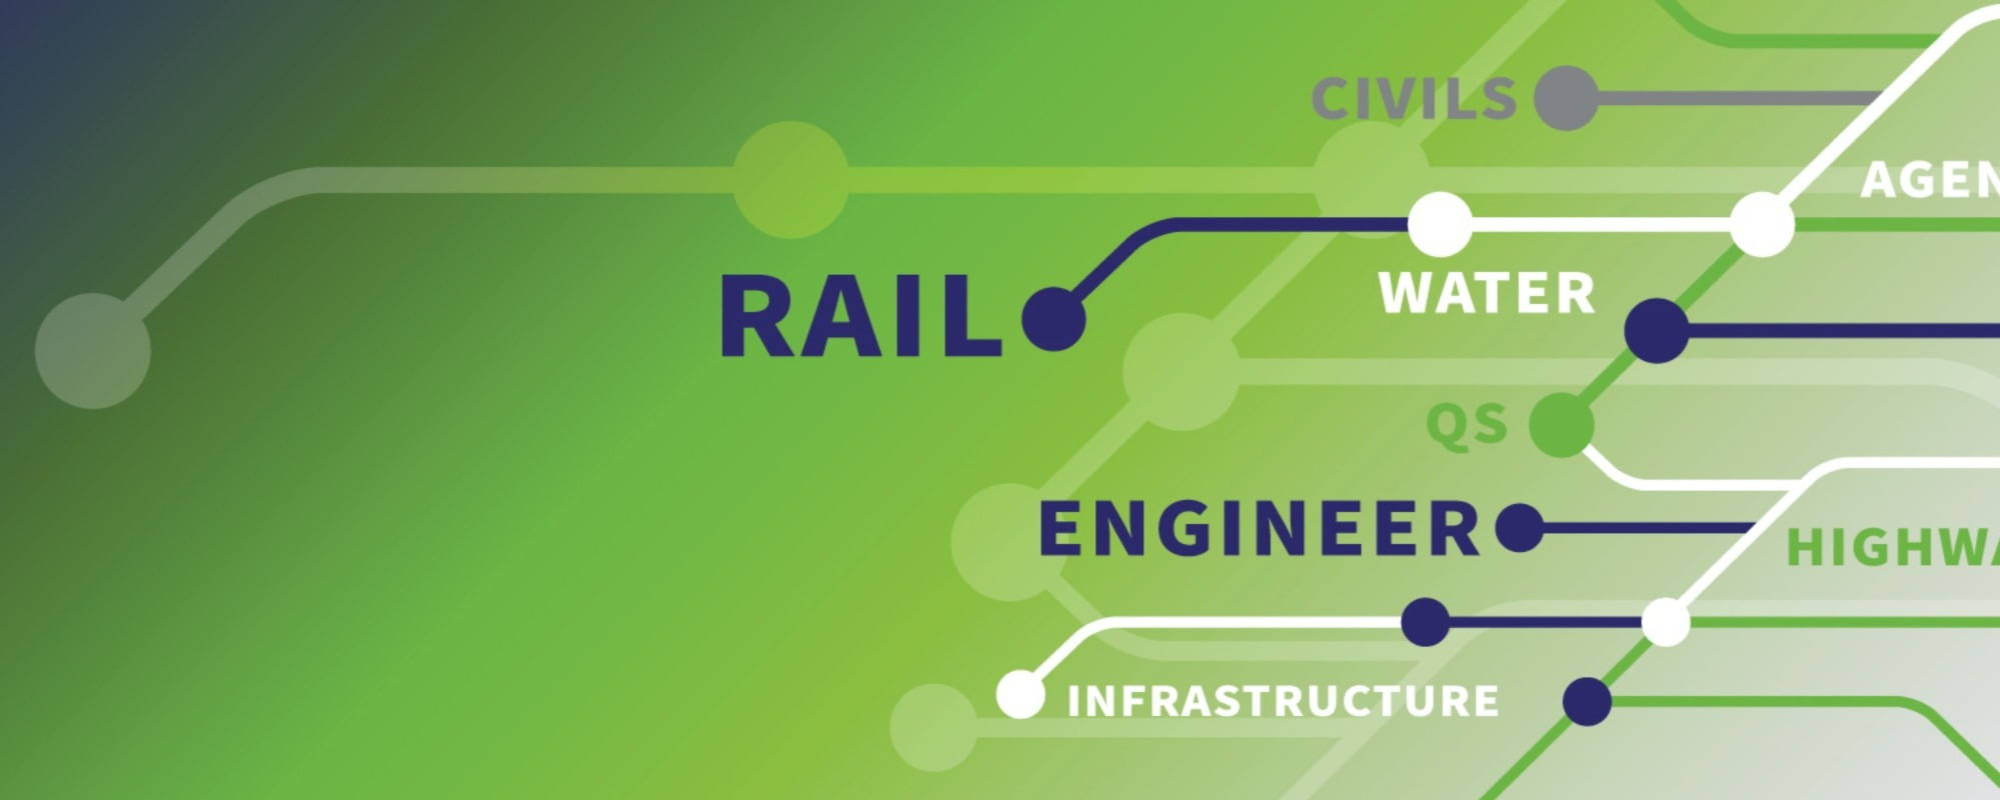 Graphic image with train lines and workers, depicting the Civil and Rail Engineering industries